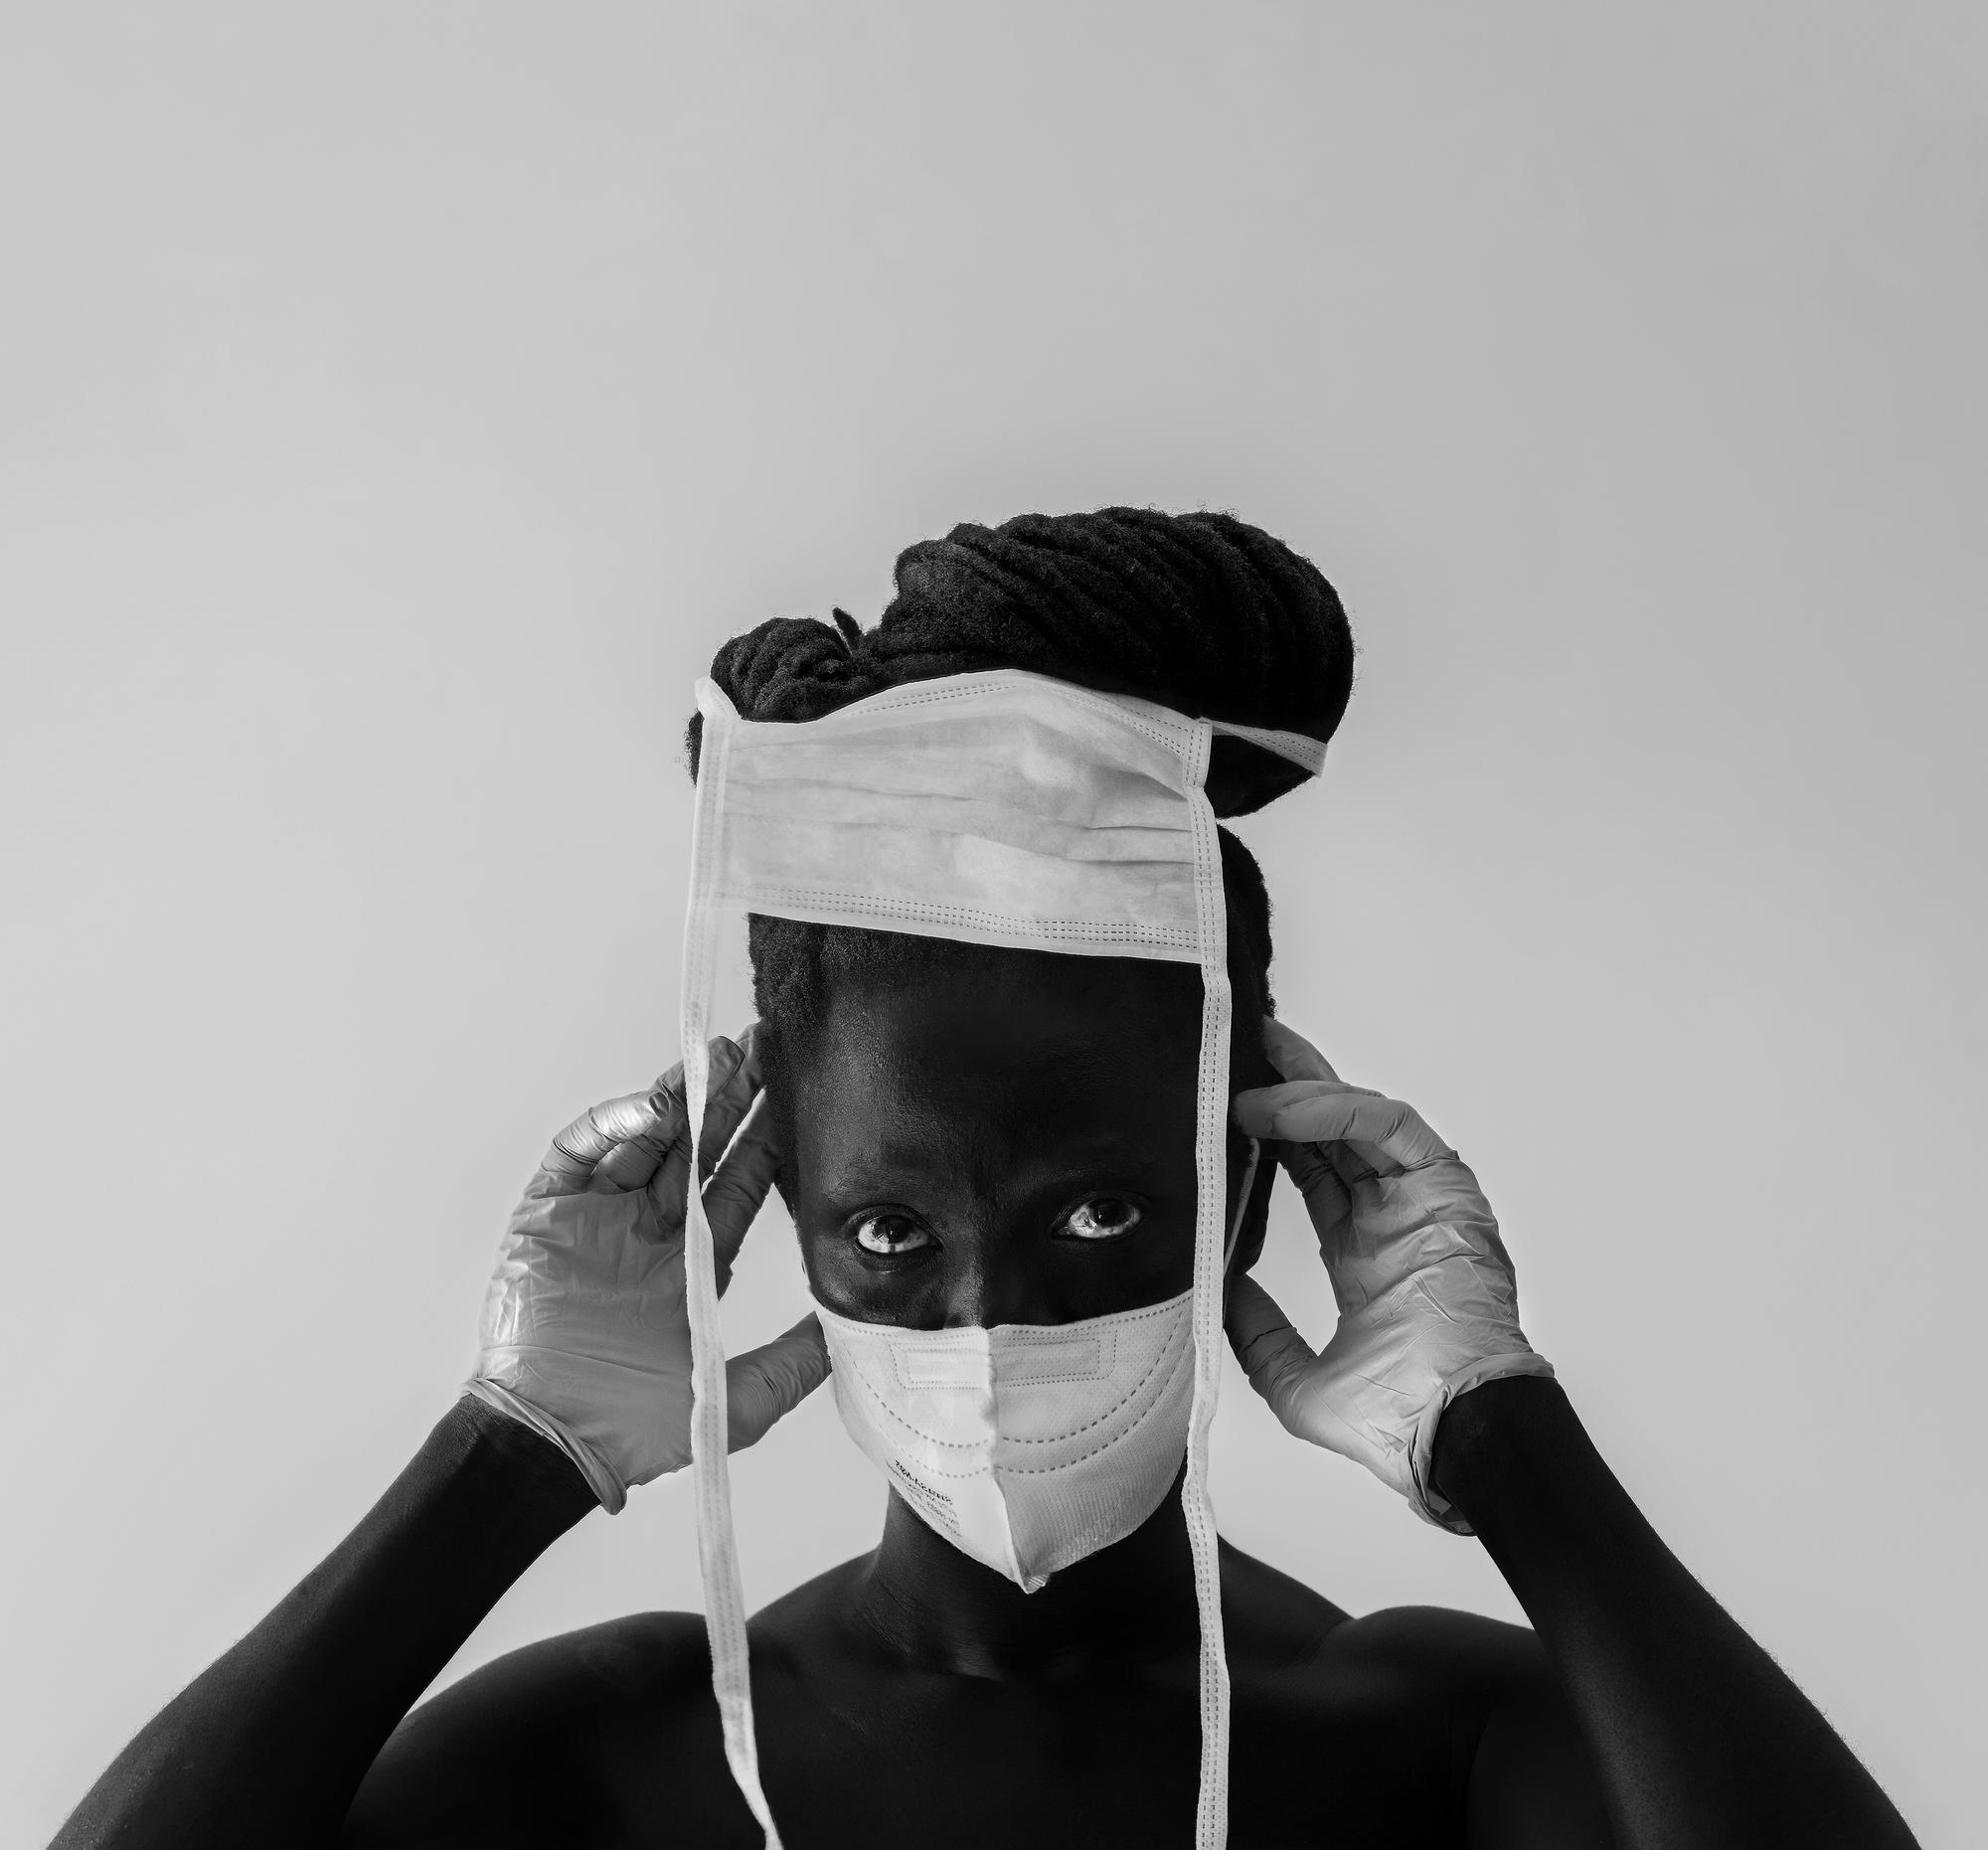 A black and white image of a person with a surgical mask on, gloves and a mask in their hair.